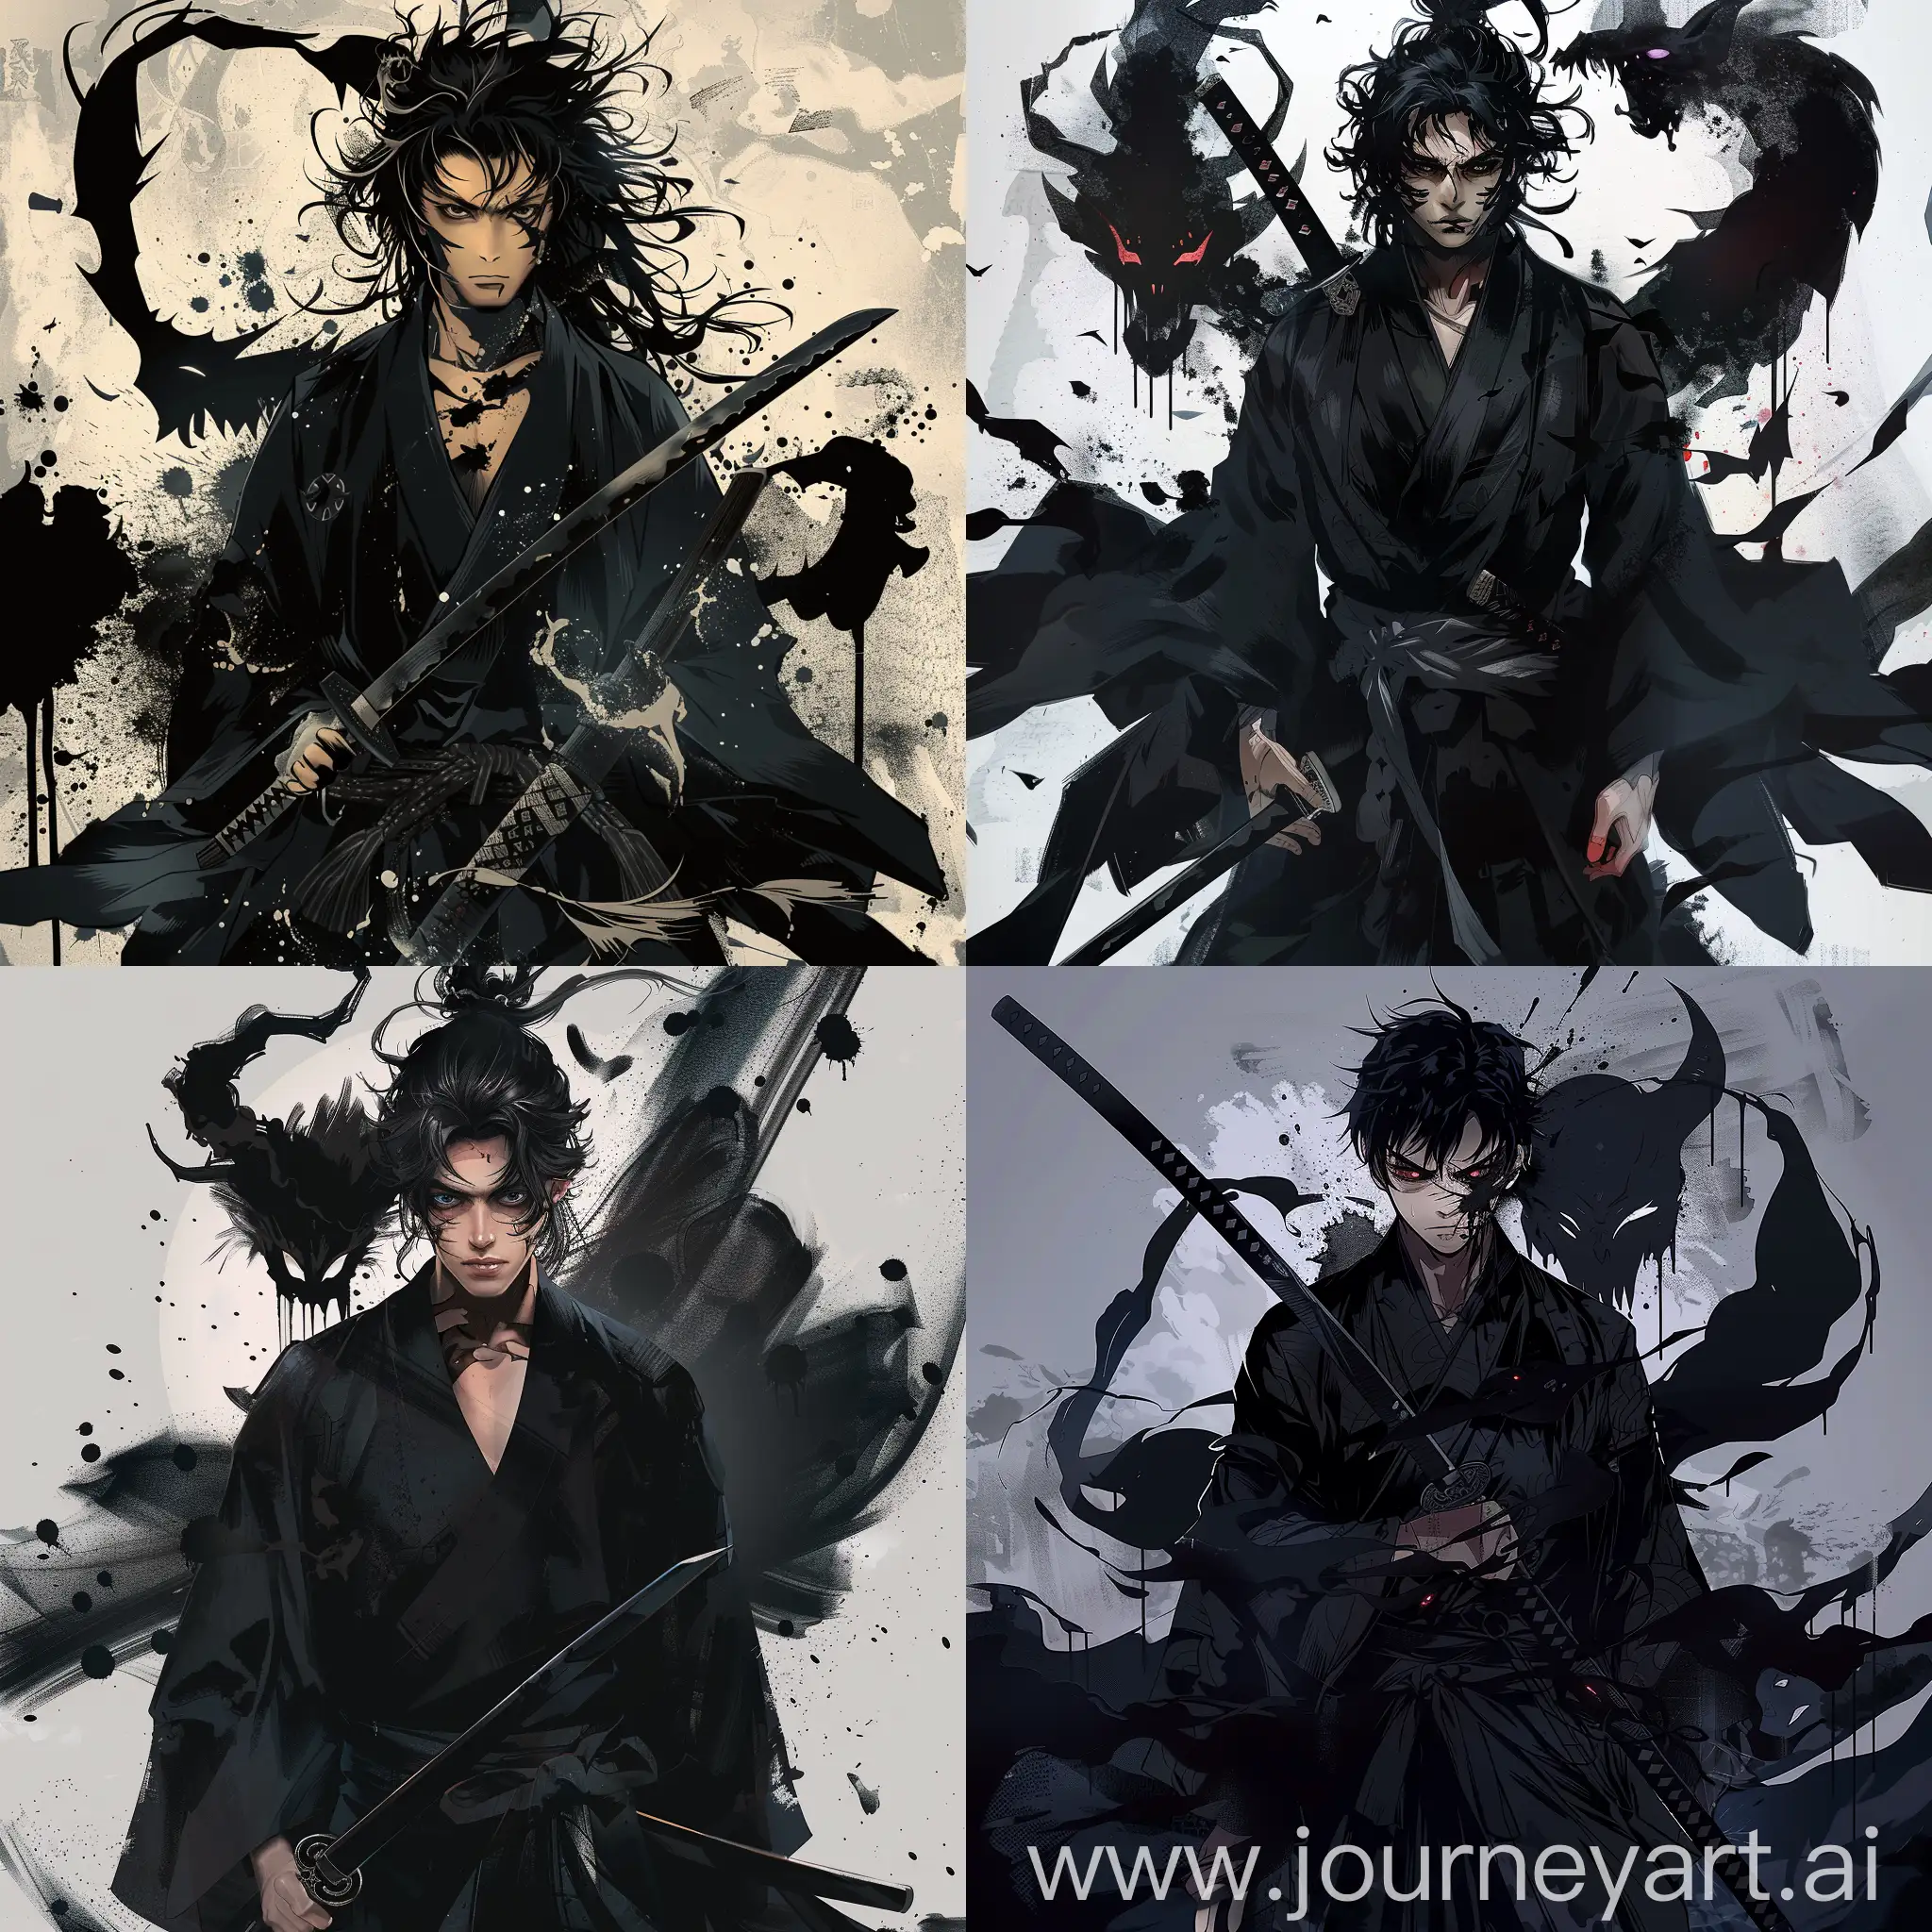 Black haired male, full body, black kimono, black katana, vagabond manga style, surrounded by shadows, anger and sadness, oni mask, shadows leaking from he blade, death stare, demon shape behind